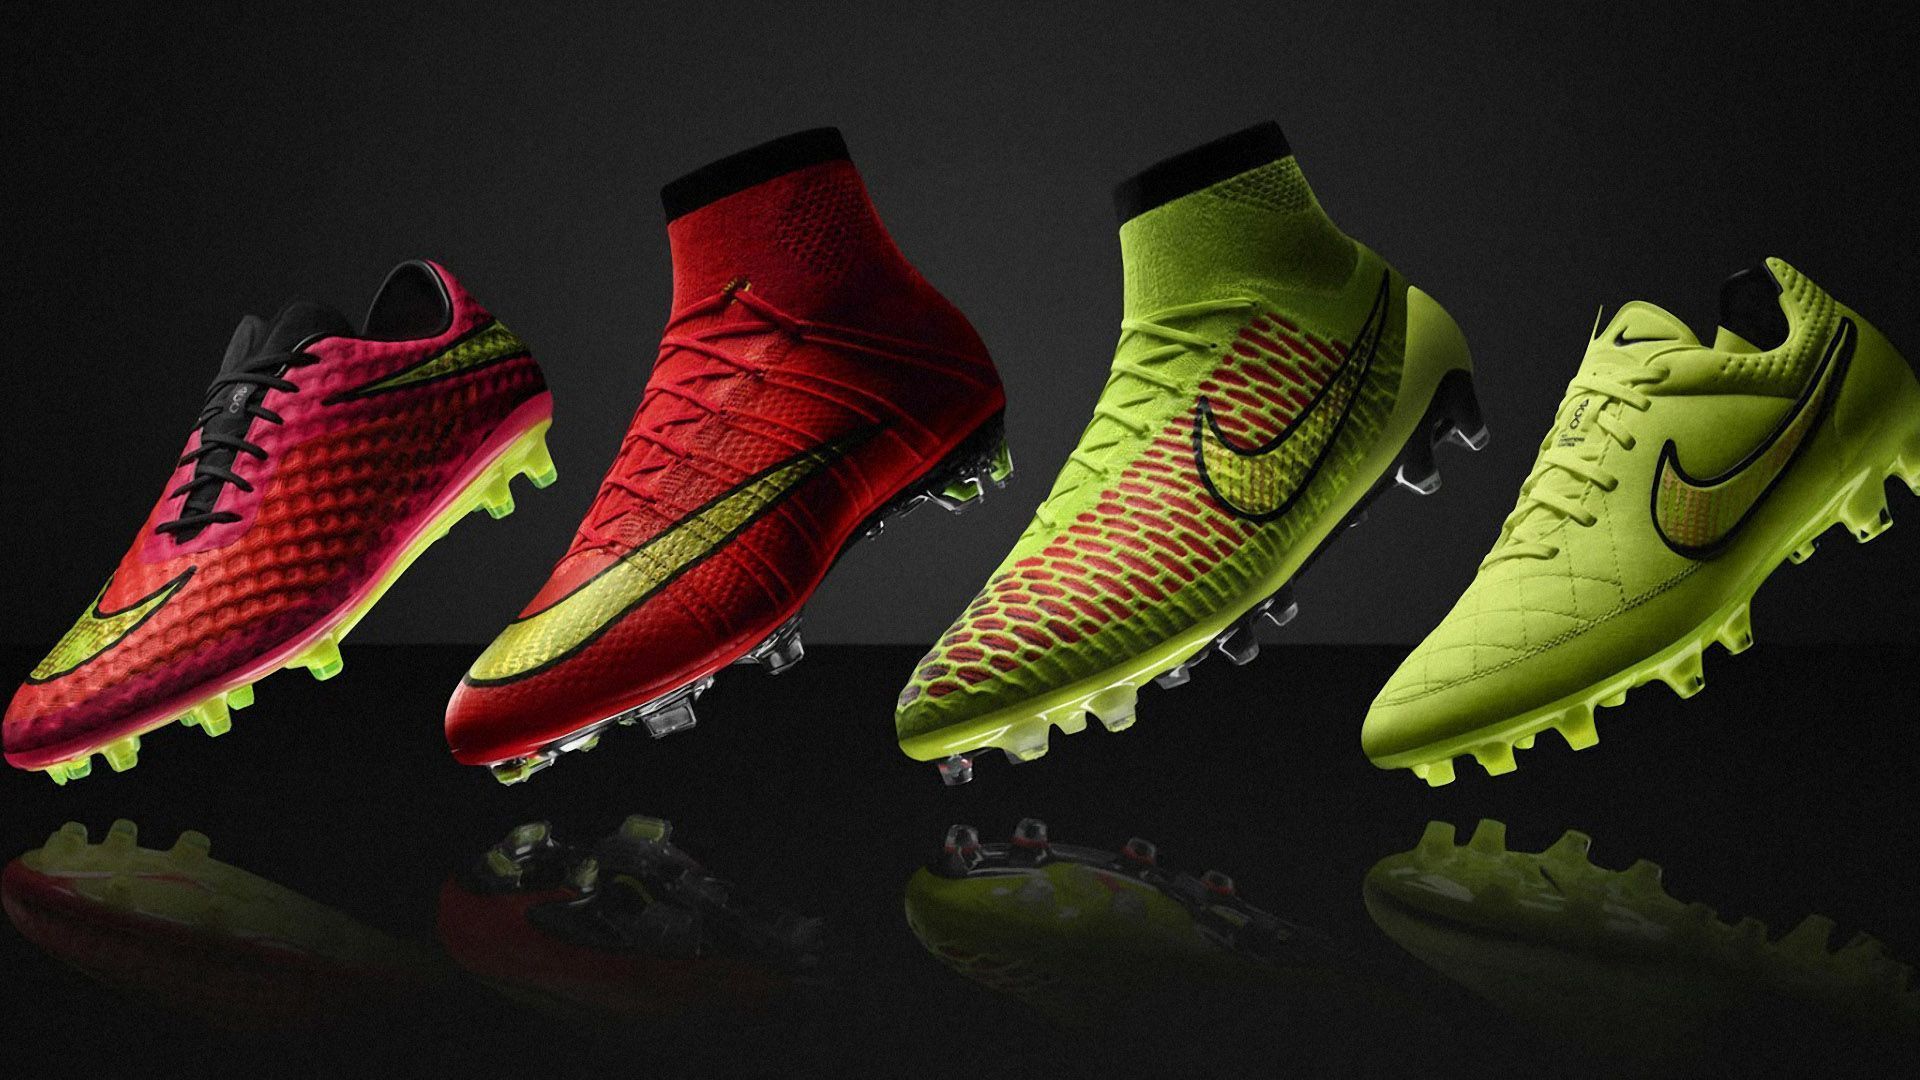 Mobile Nike Symbol Pictures - Nike Football Boots 2014 - HD Wallpaper 